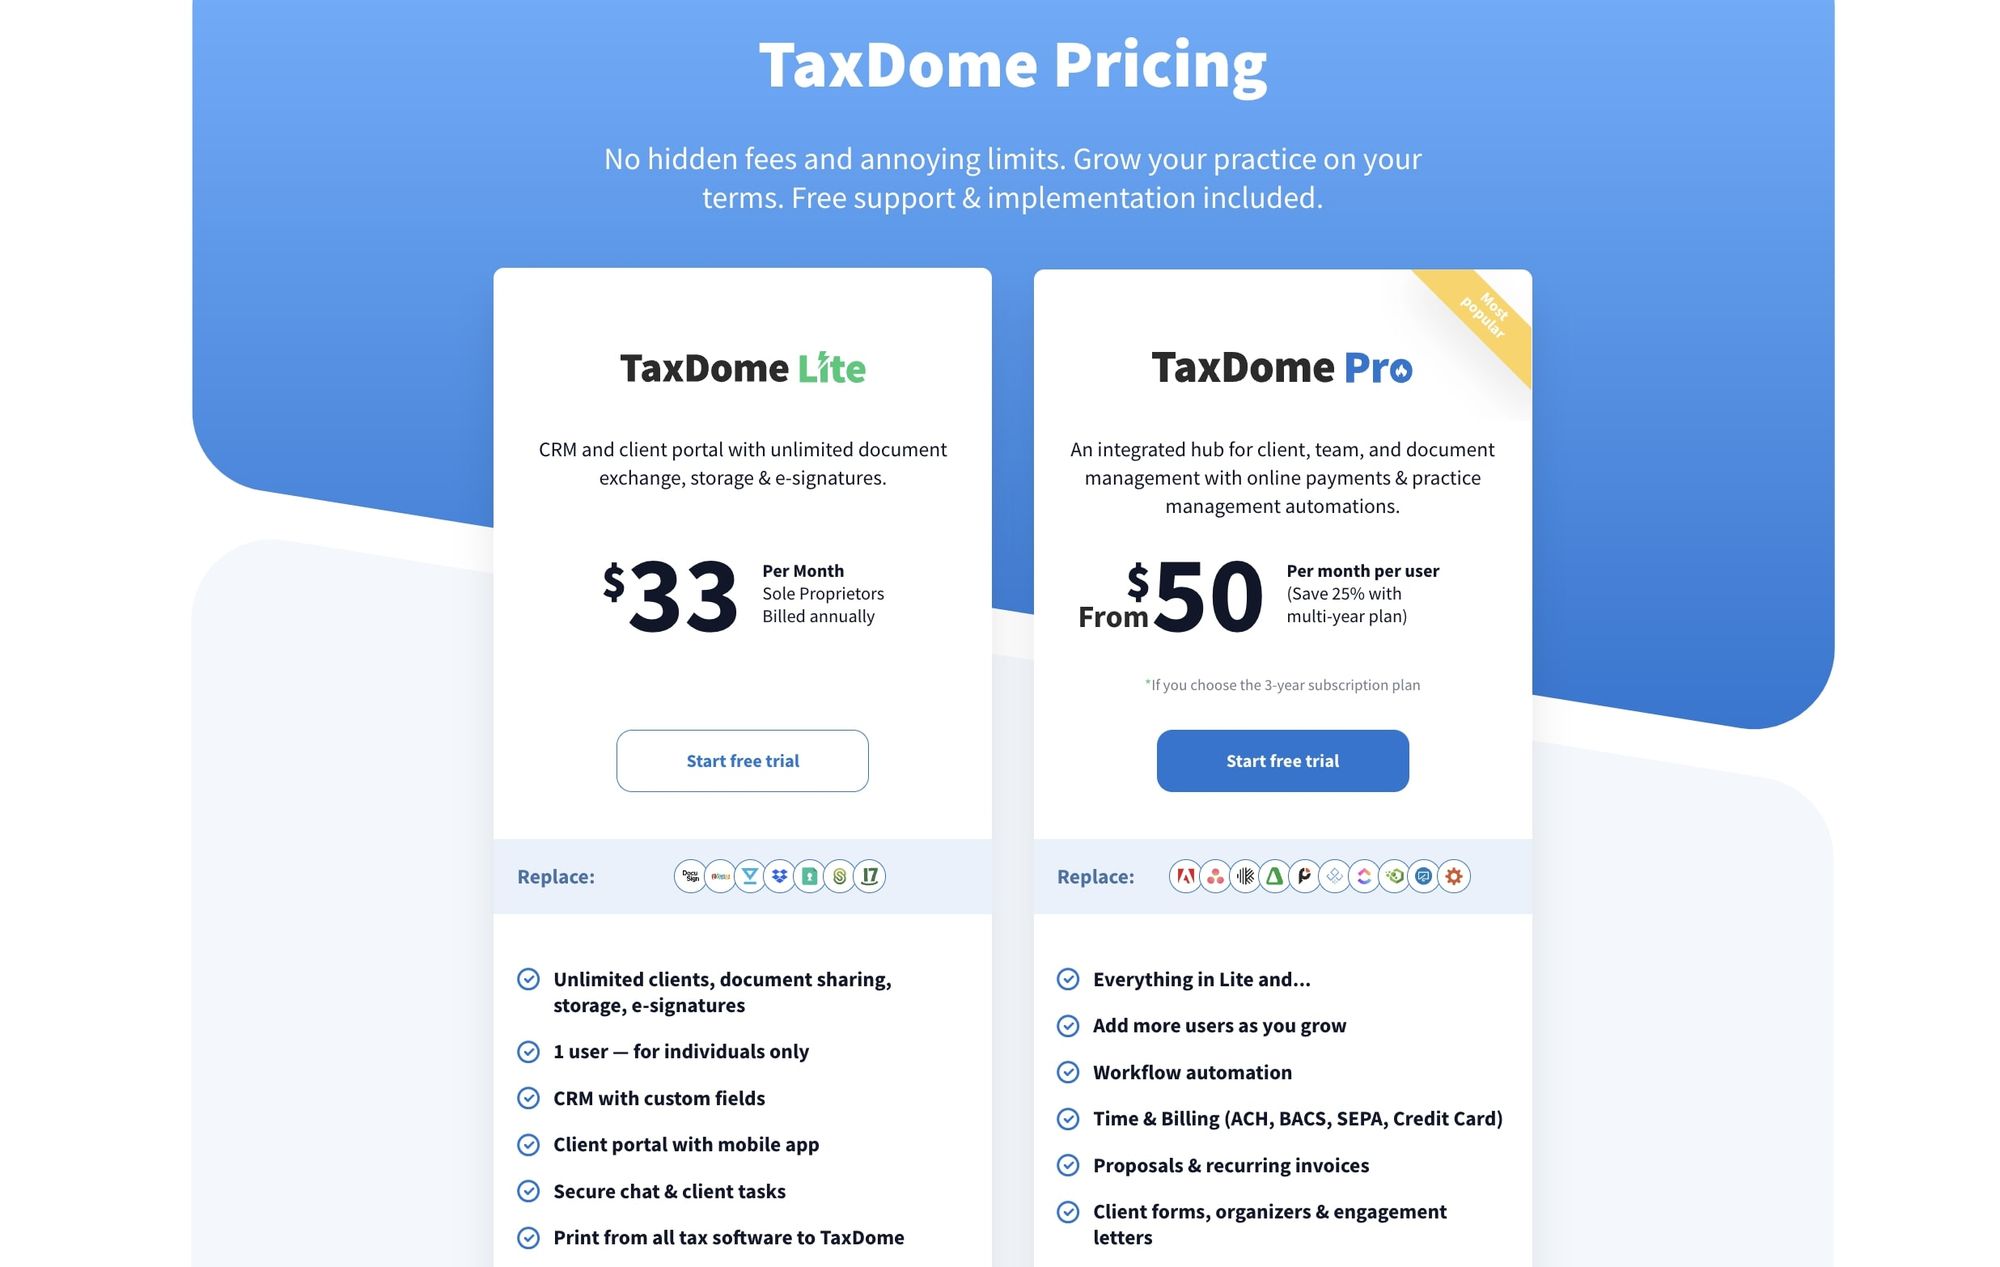 TaxDome pricing